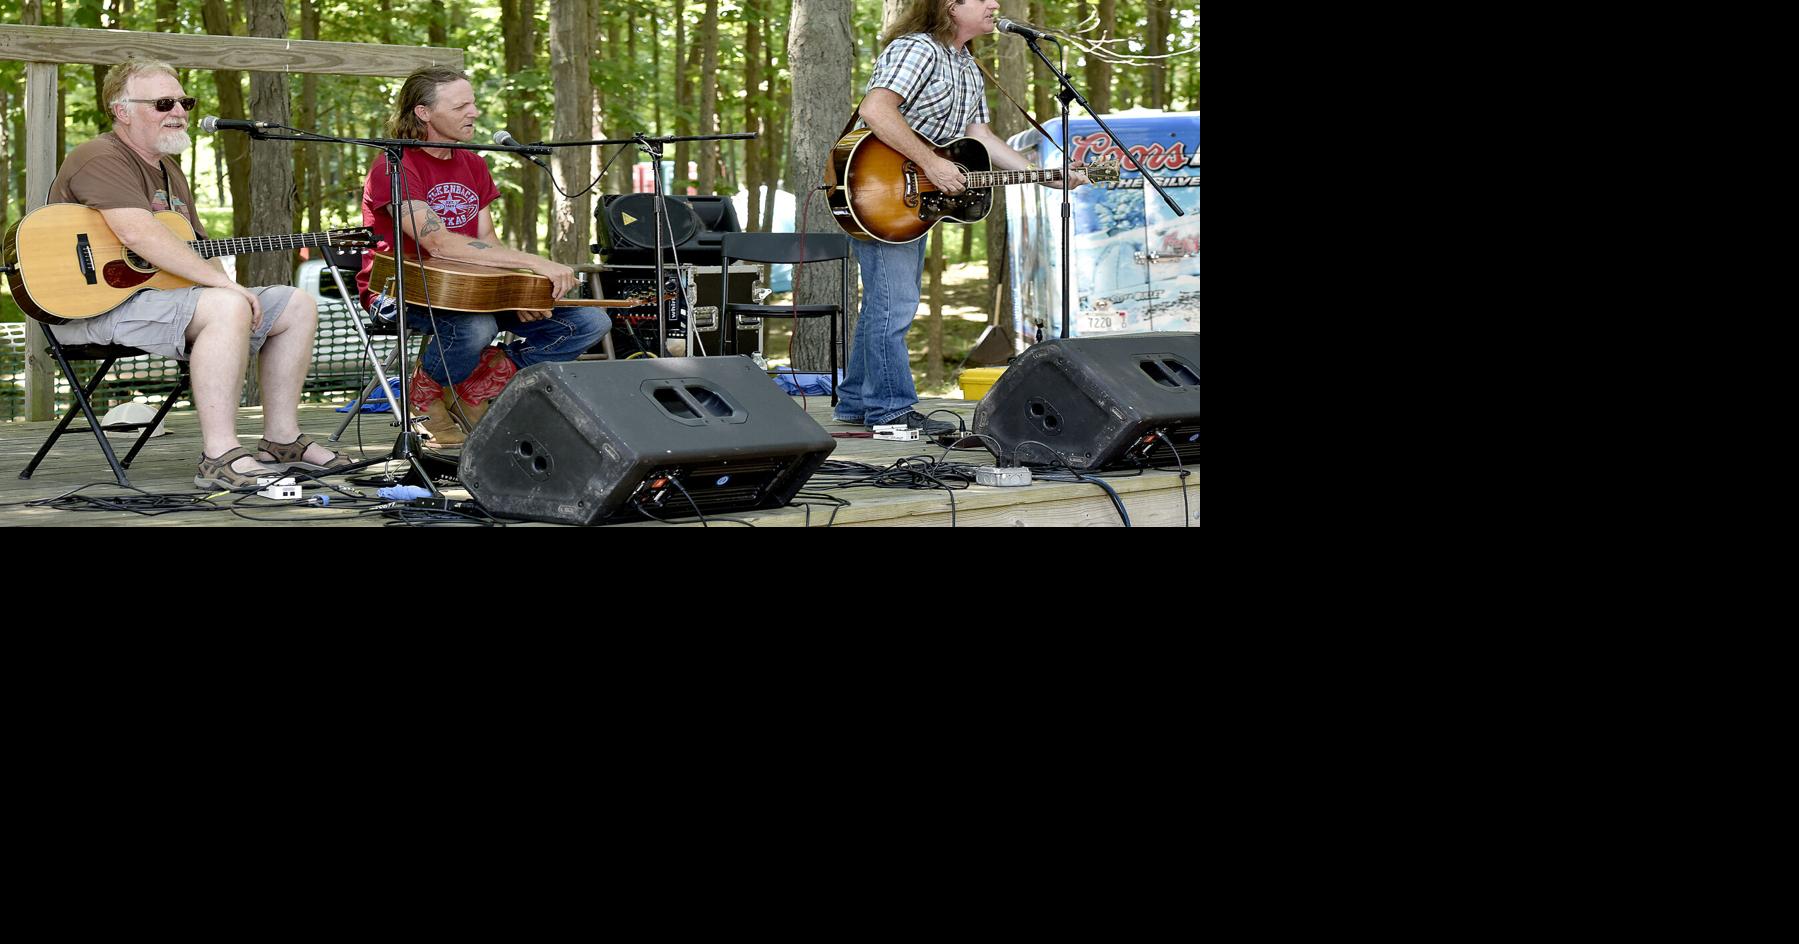 Moccasin Creek Festival a sign of COVID recovery Local News